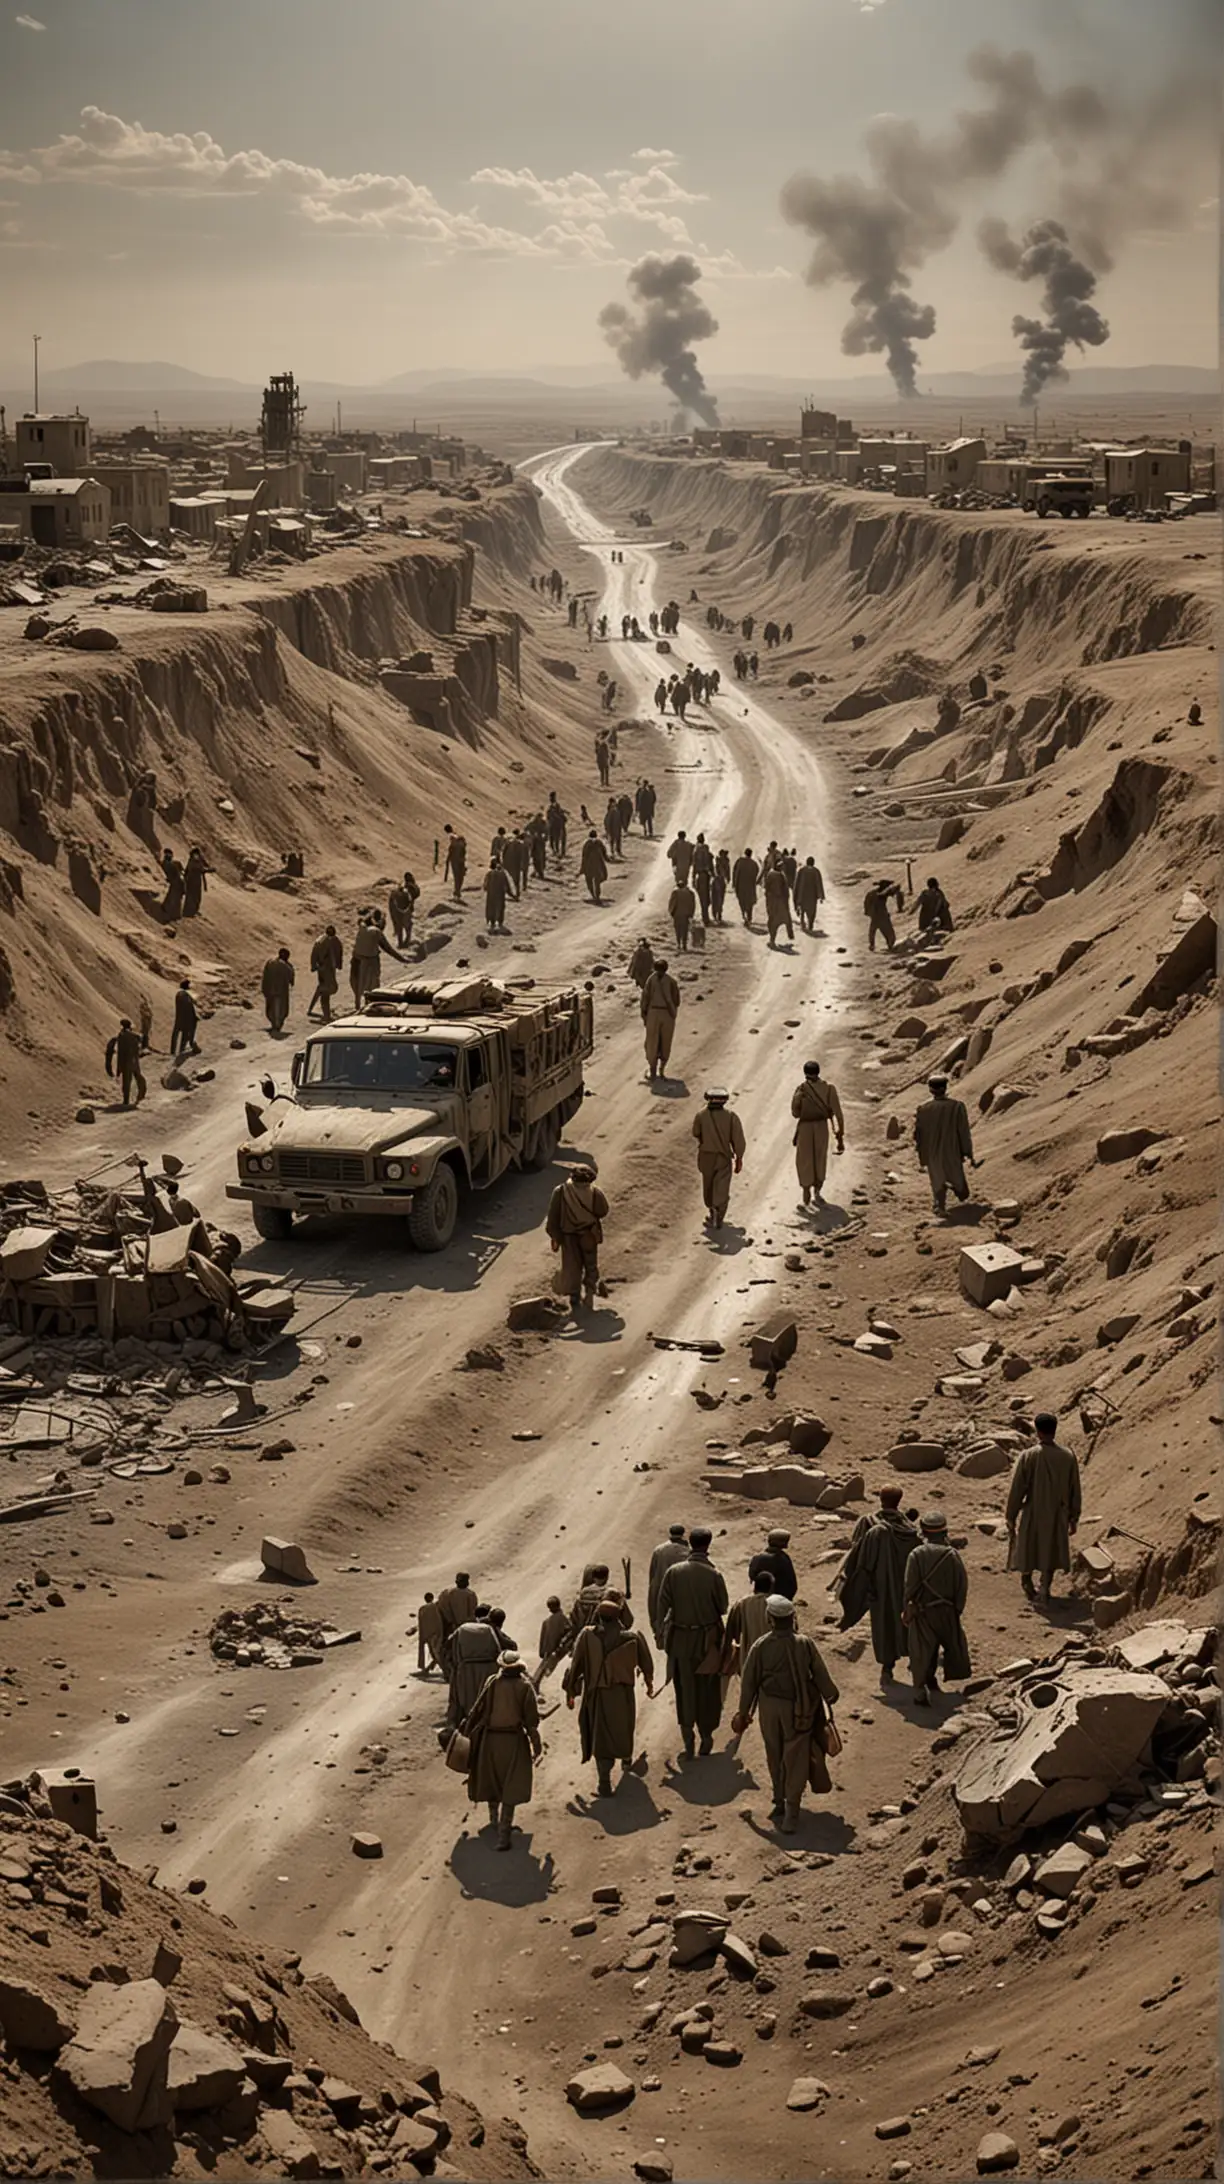 Soviet Troops Withdrawal from Afghanistan Desolate Landscape and Crumbling Infrastructure